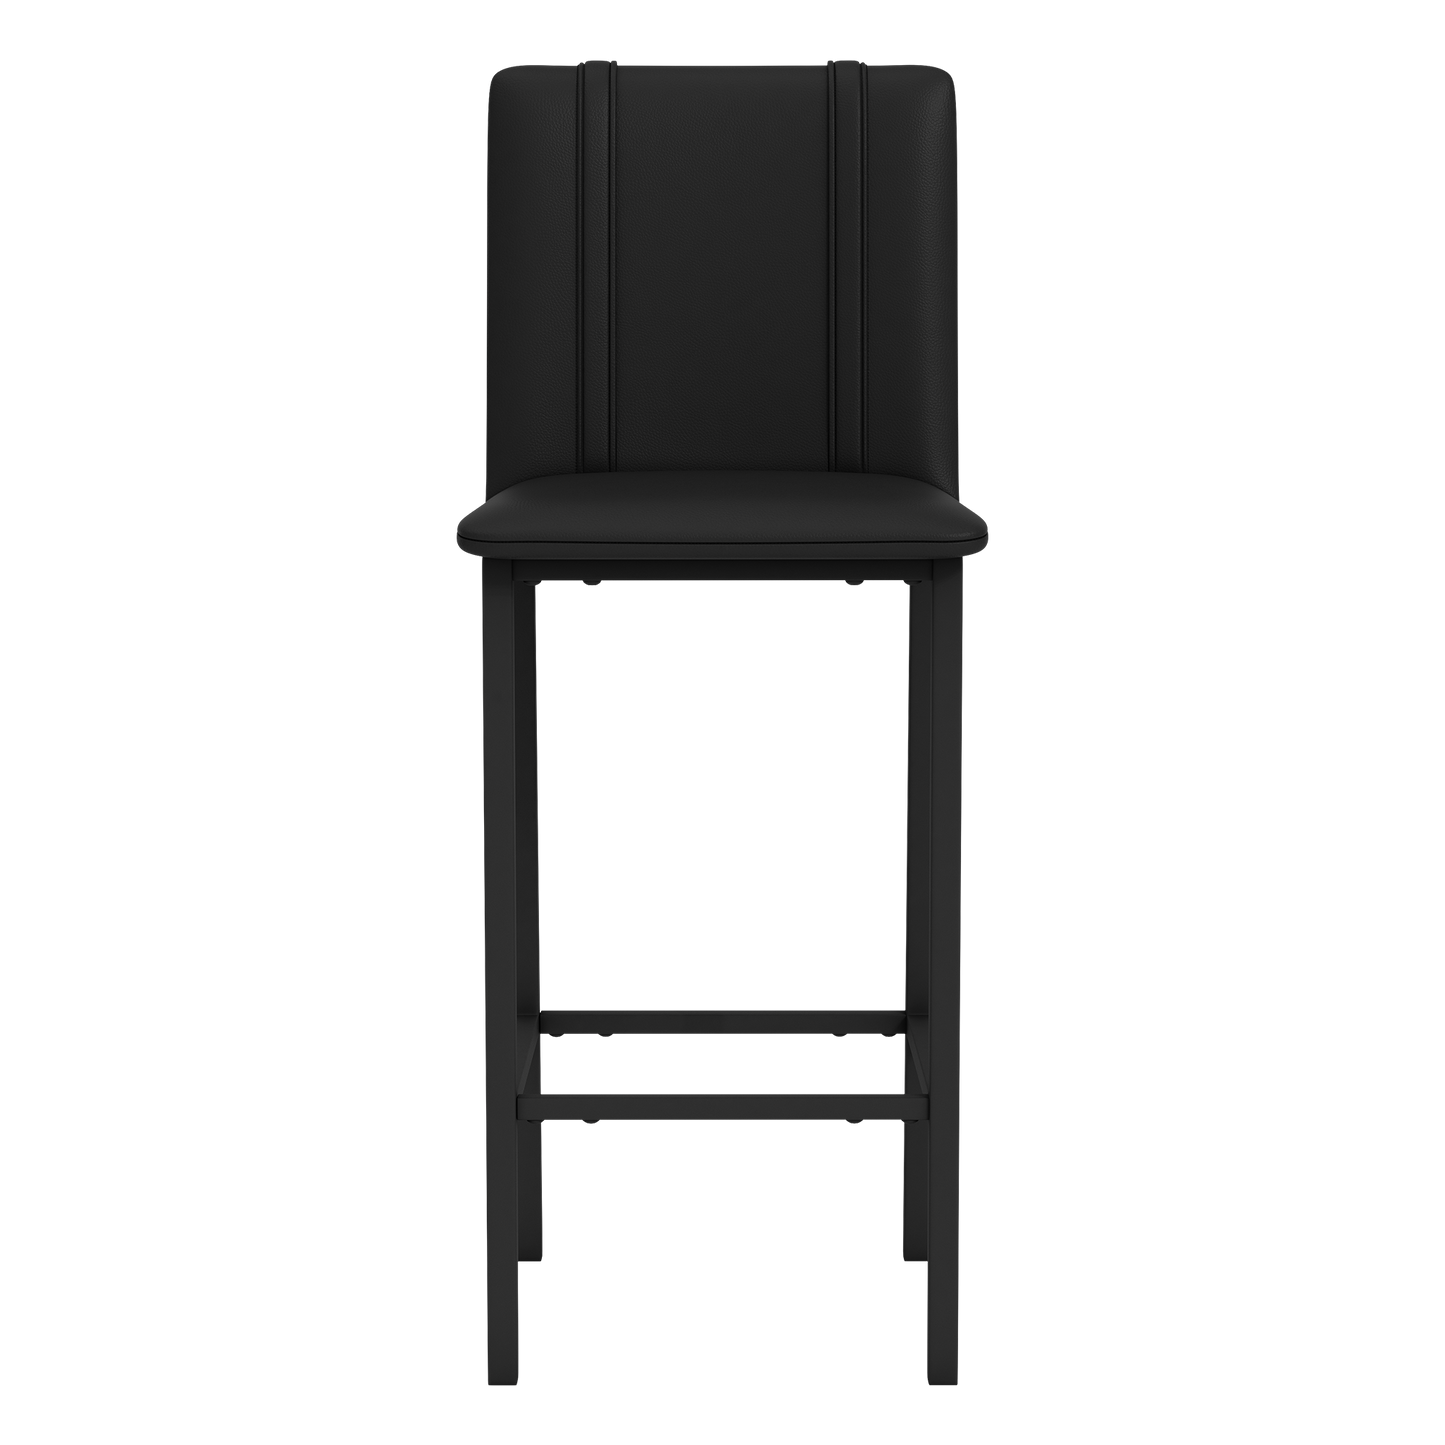 Bar Stool 500 with Vegas Golden Knights with Secondary Logo Set of 2